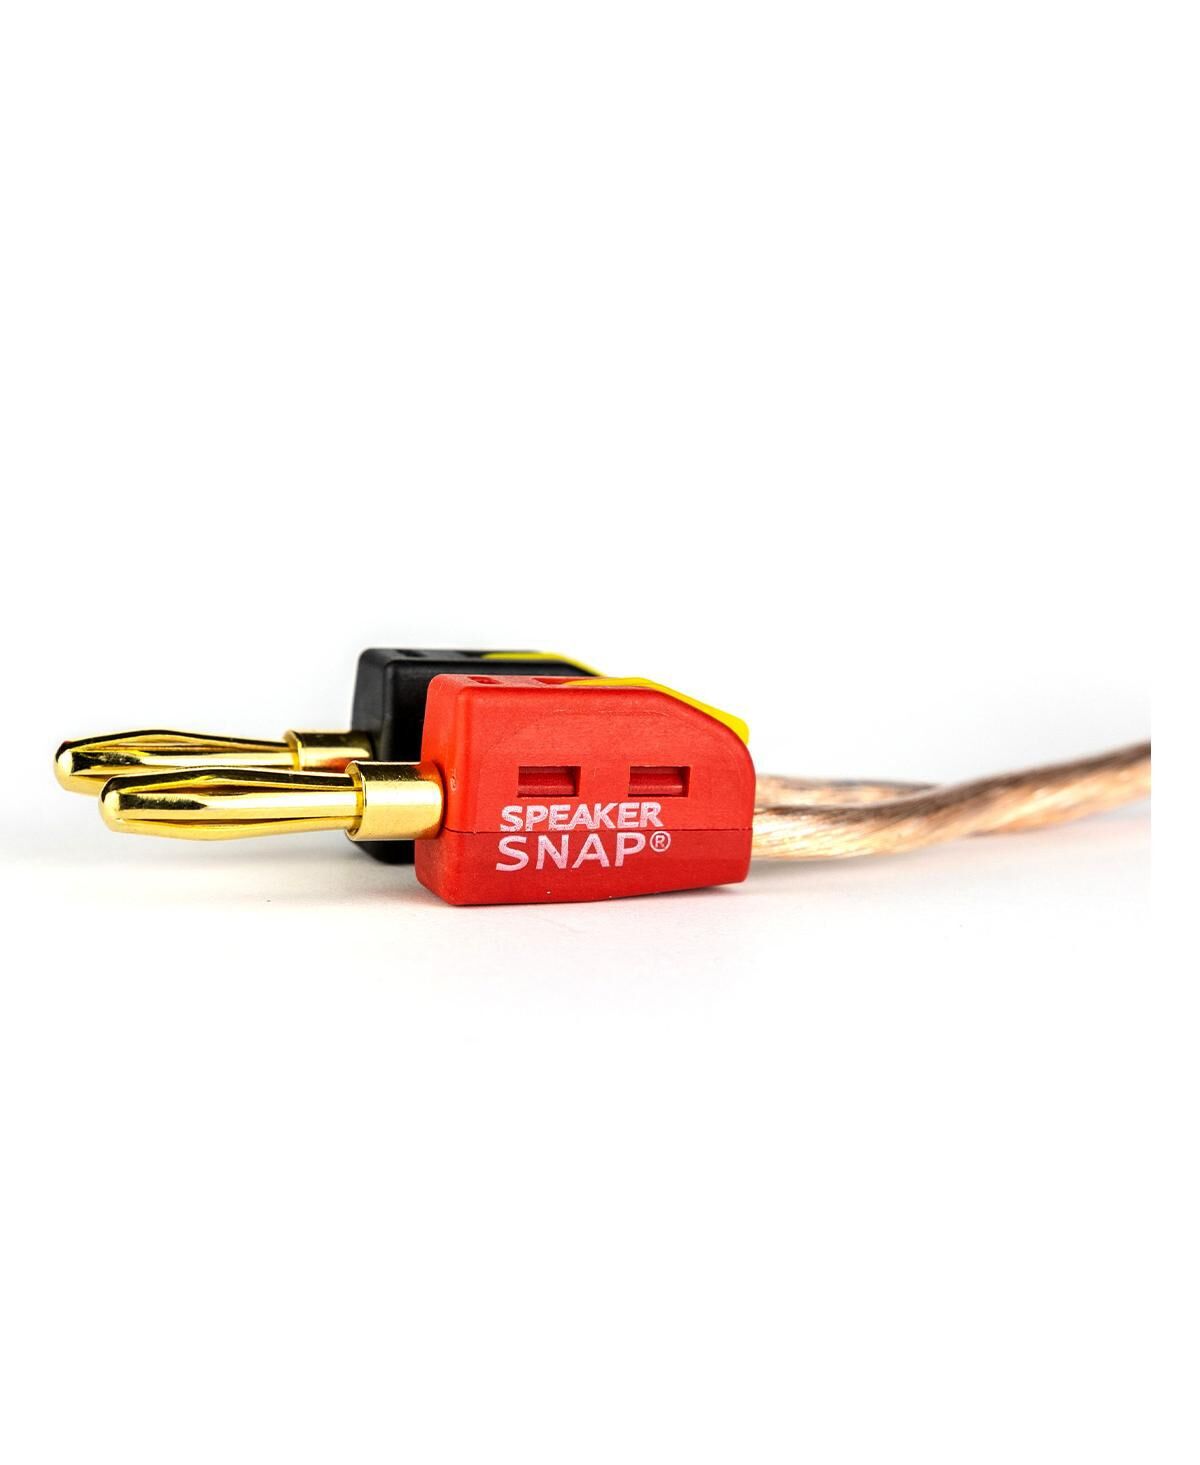 Speaker Snap 50 Count of Fast & Secure Banana Plugs, Gold Plated, 12-24 Awg, for Home Theaters, Speaker Wire, Wall Plates, and Receivers - Black/red